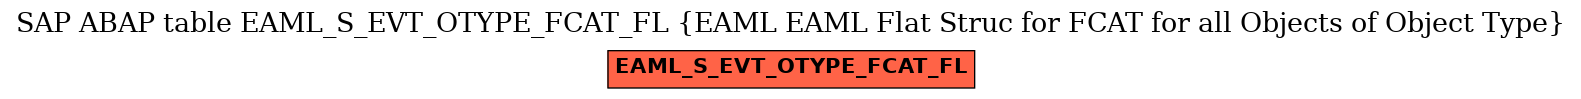 E-R Diagram for table EAML_S_EVT_OTYPE_FCAT_FL (EAML EAML Flat Struc for FCAT for all Objects of Object Type)